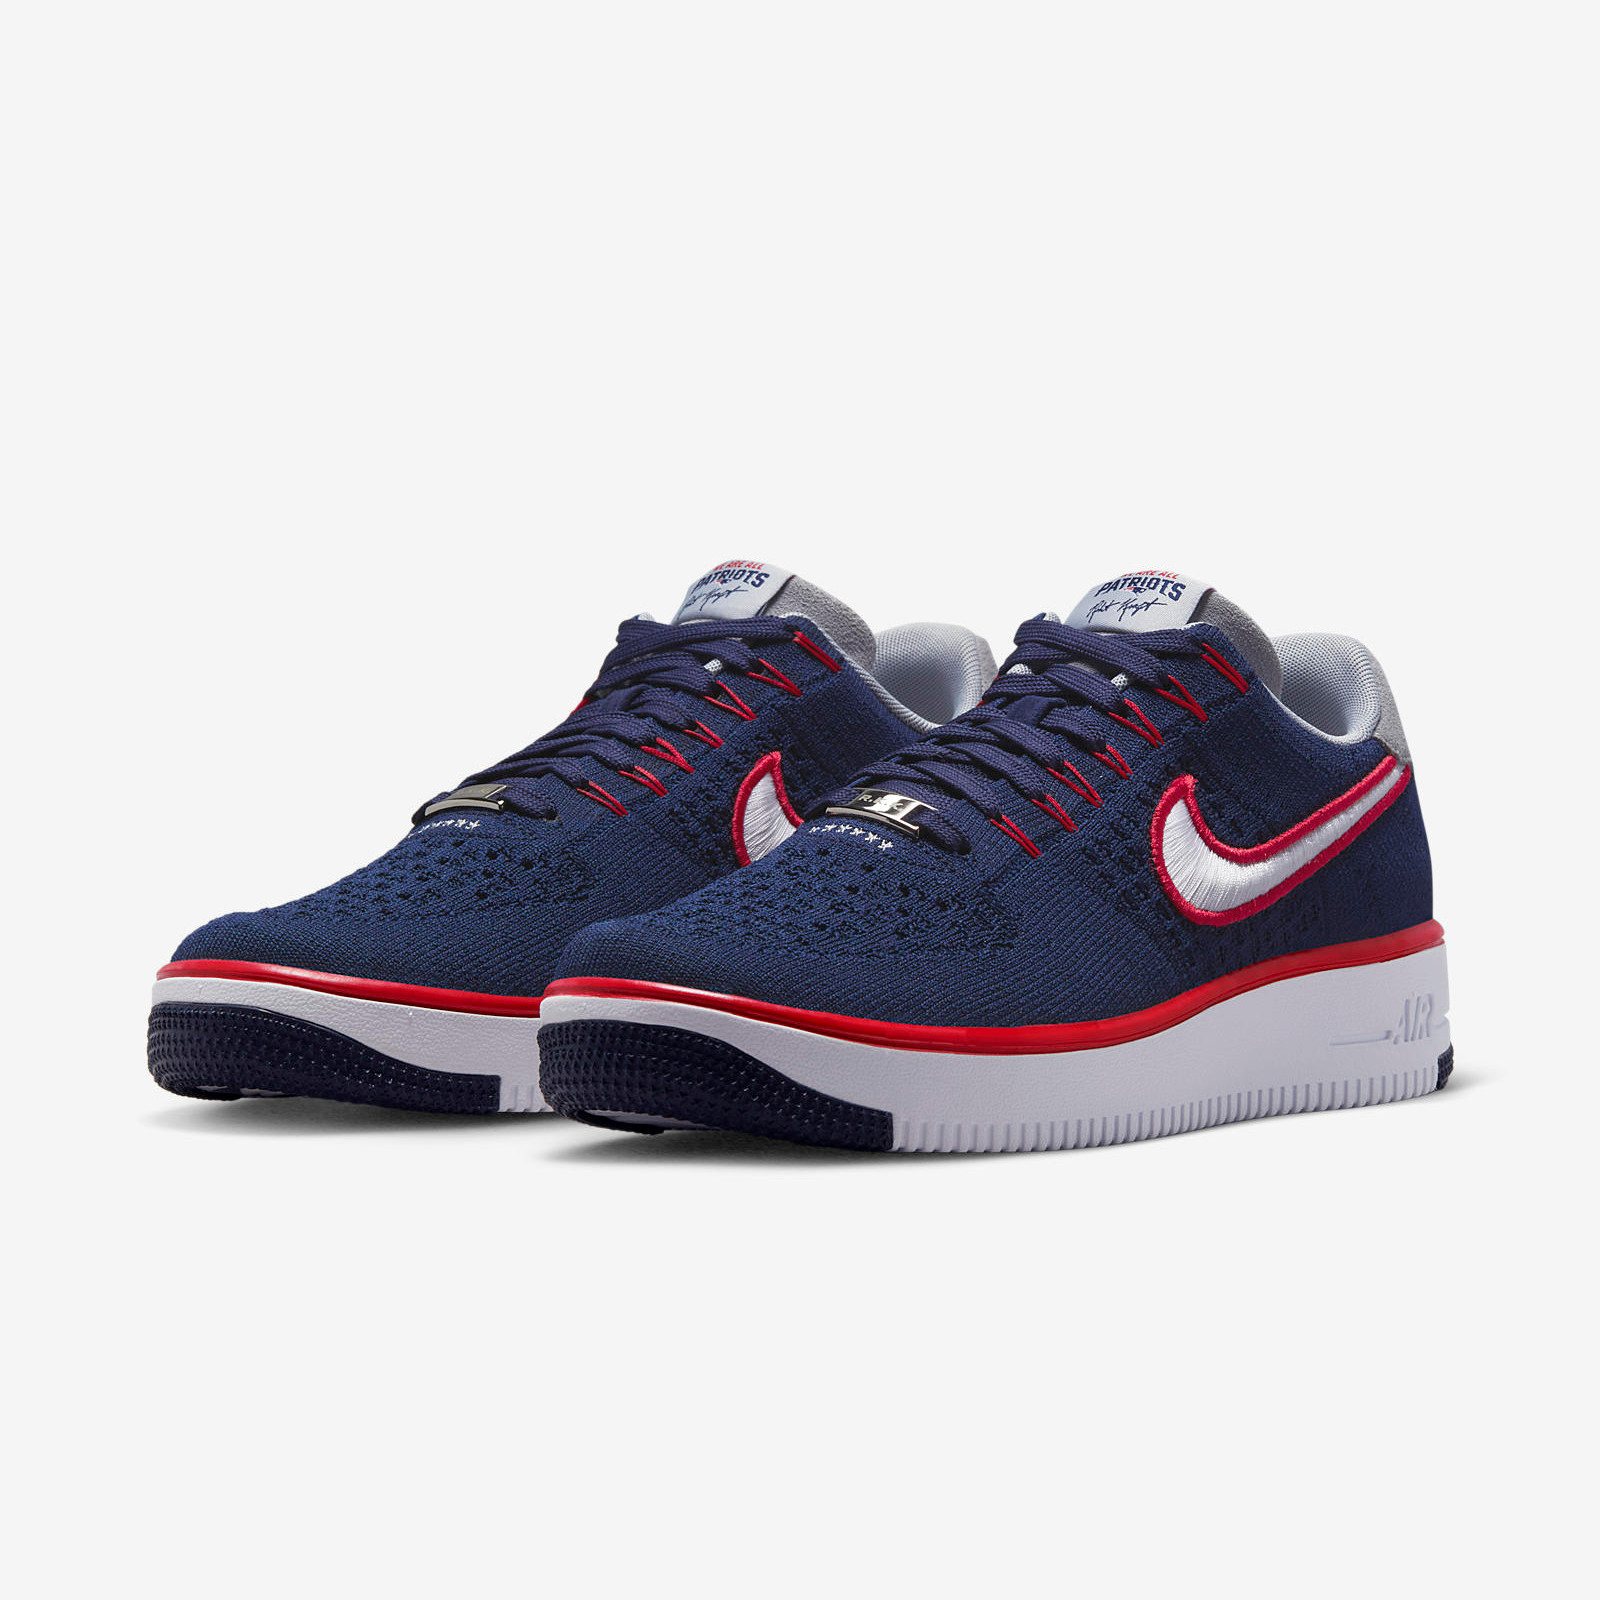 Nike Air Force 1
Ultra Flyknit Low
Navy / Red